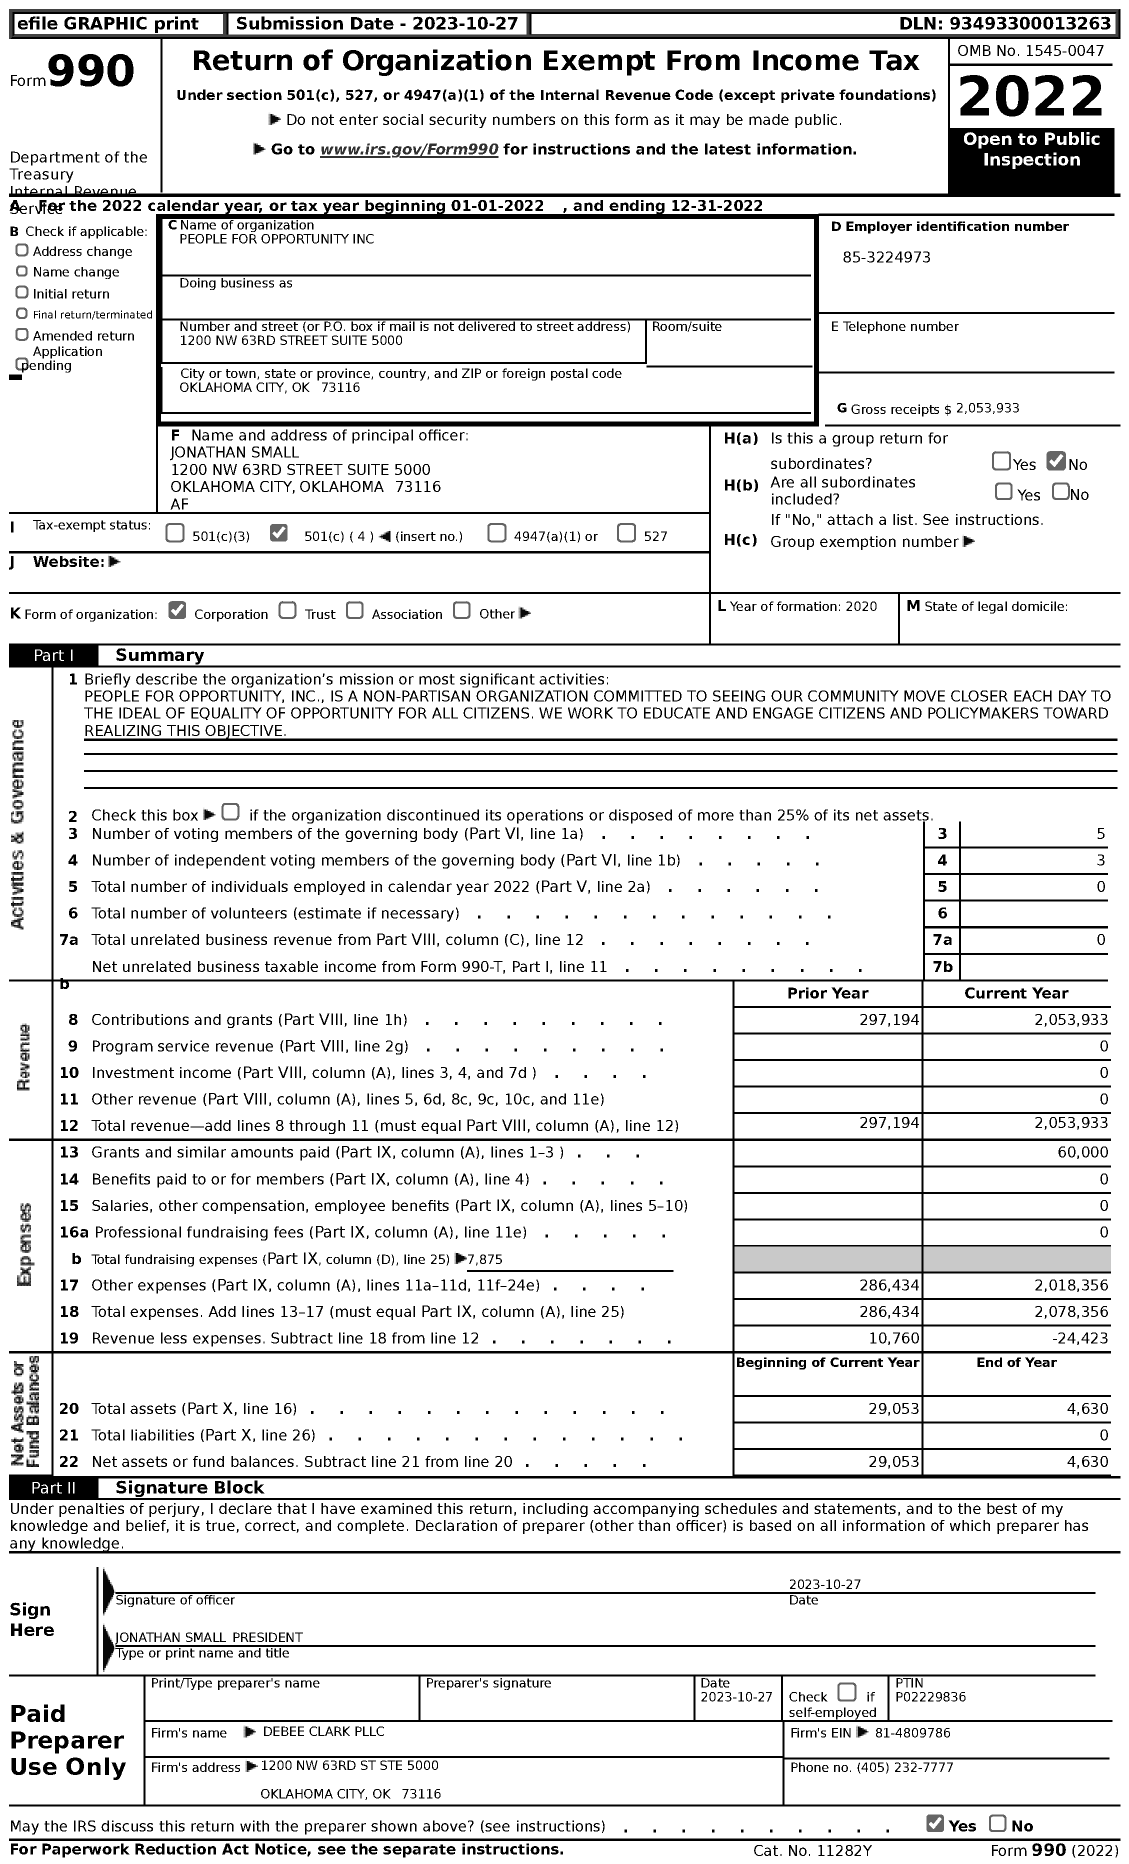 Image of first page of 2022 Form 990 for People for Opportunity